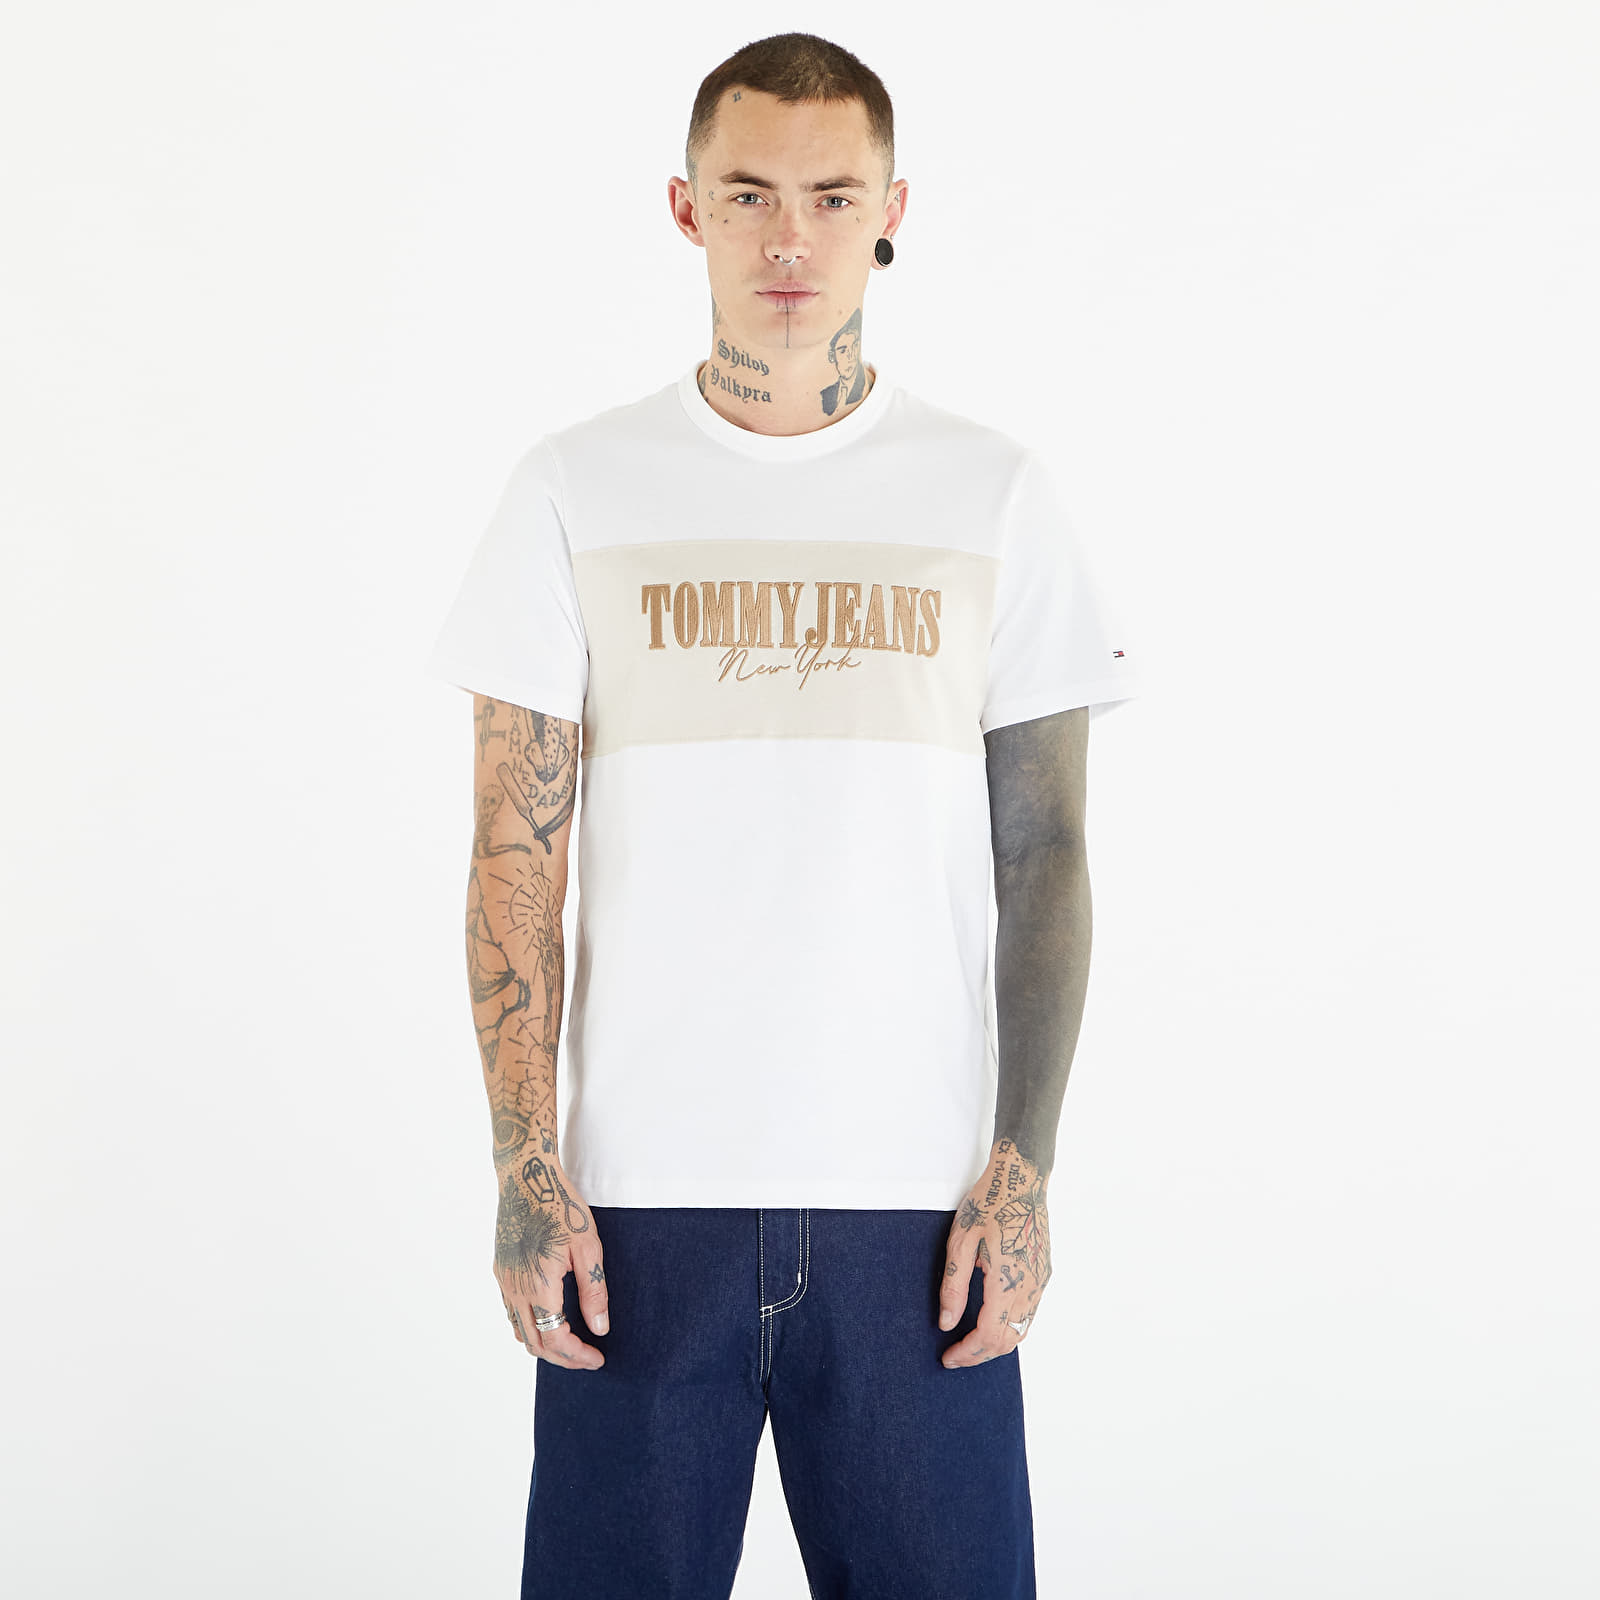 Tommy Hilfiger - Tommy Jeans Regular Linear Block Short Sleeve Tee White